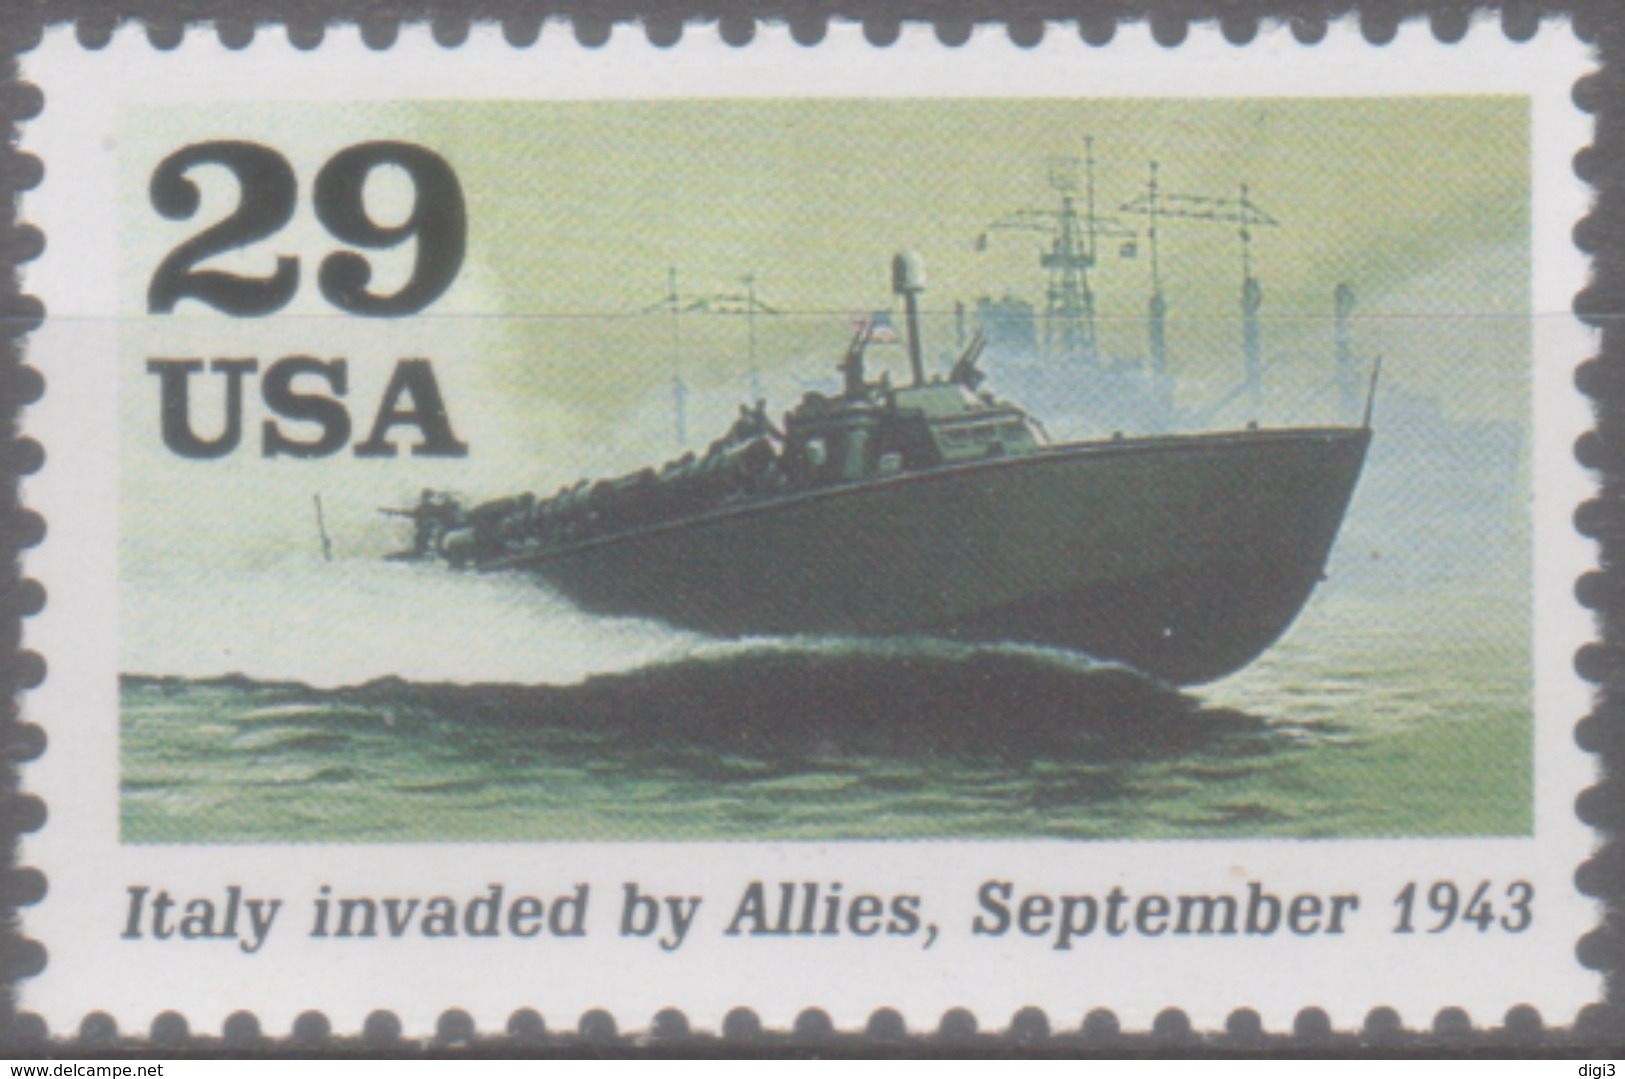 USA, 1993, World War II, Events Of 1943, Italy Invaded By Allies, PT Boat , 29 C., MNH - Neufs